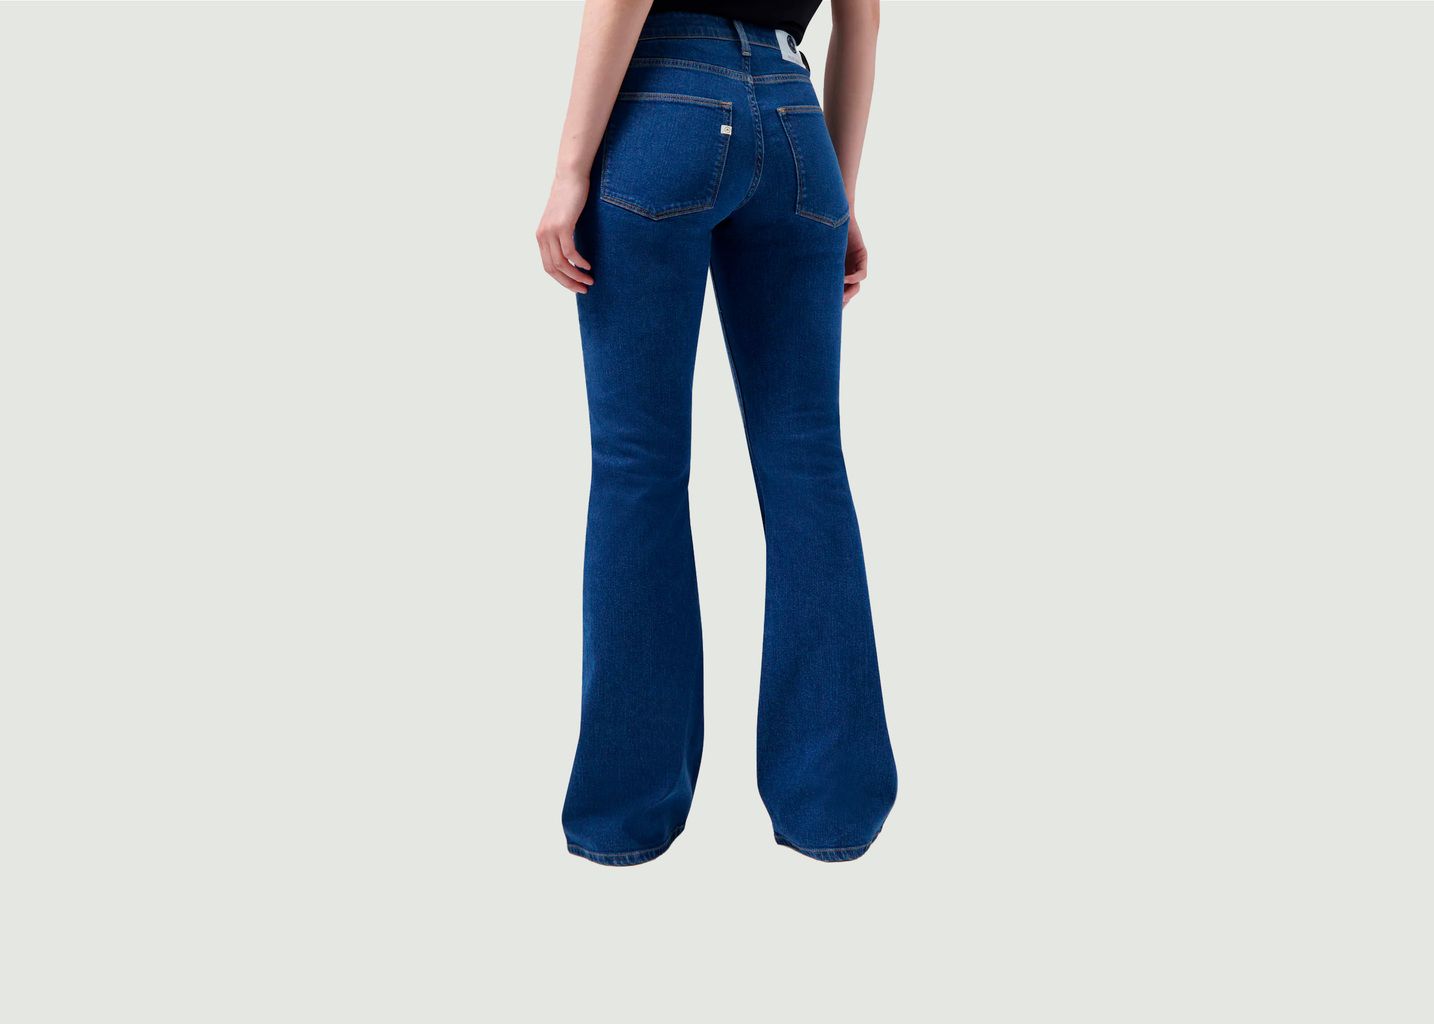 Jean Fiona Flared - Mud Jeans